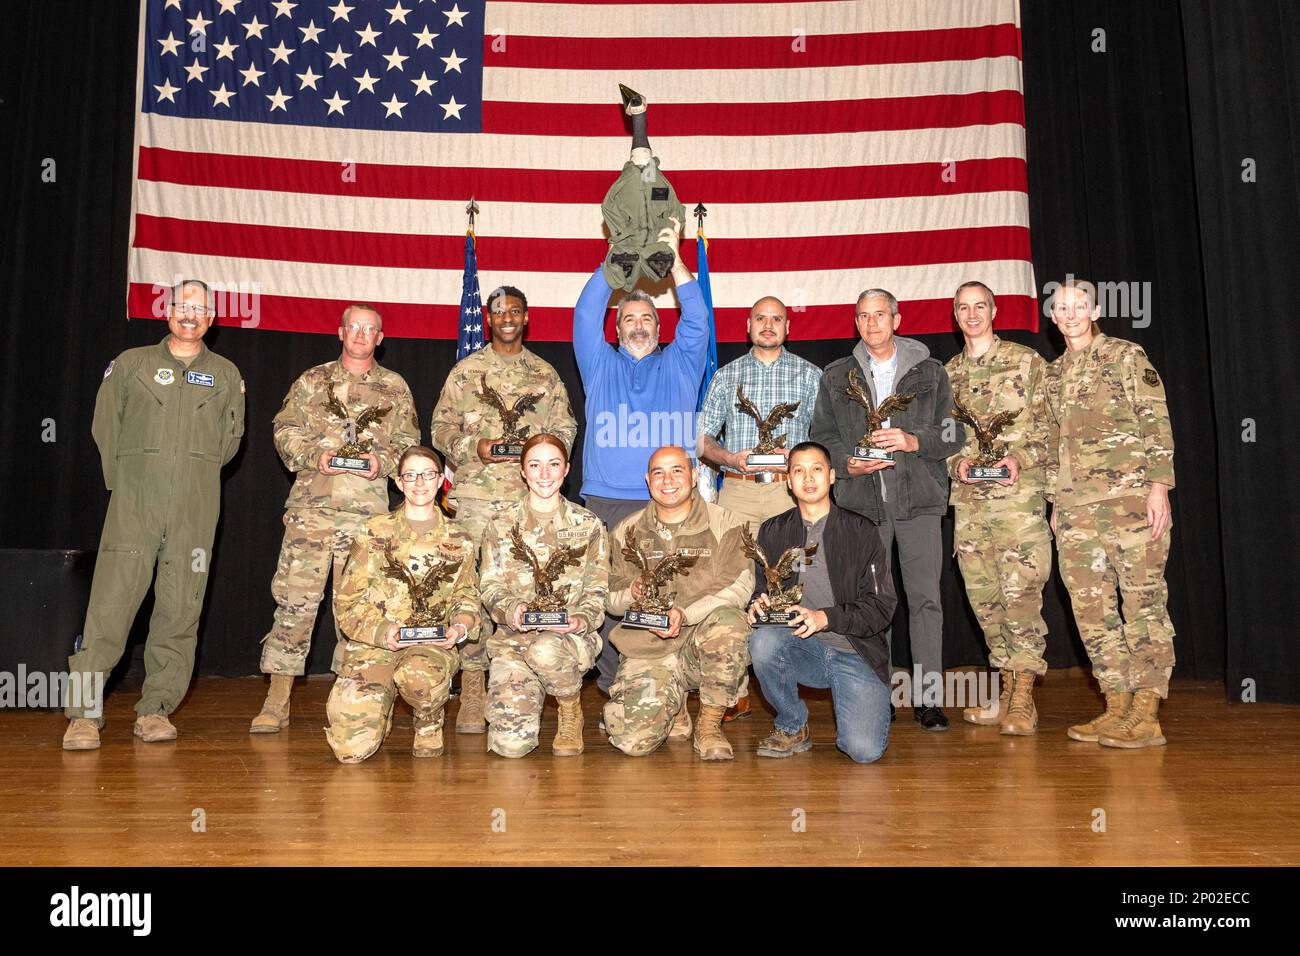 The fourth quarter awards winners stand together on stage at the Robert J. Dole Community Center ballroom, Jan. 27, 2023, at MCcConnell Air Force Base, Kansas. Quarterly award ceremonies are a way to recognize individuals and teams for their hard work and accomplishments throughout the previous three months. Stock Photo